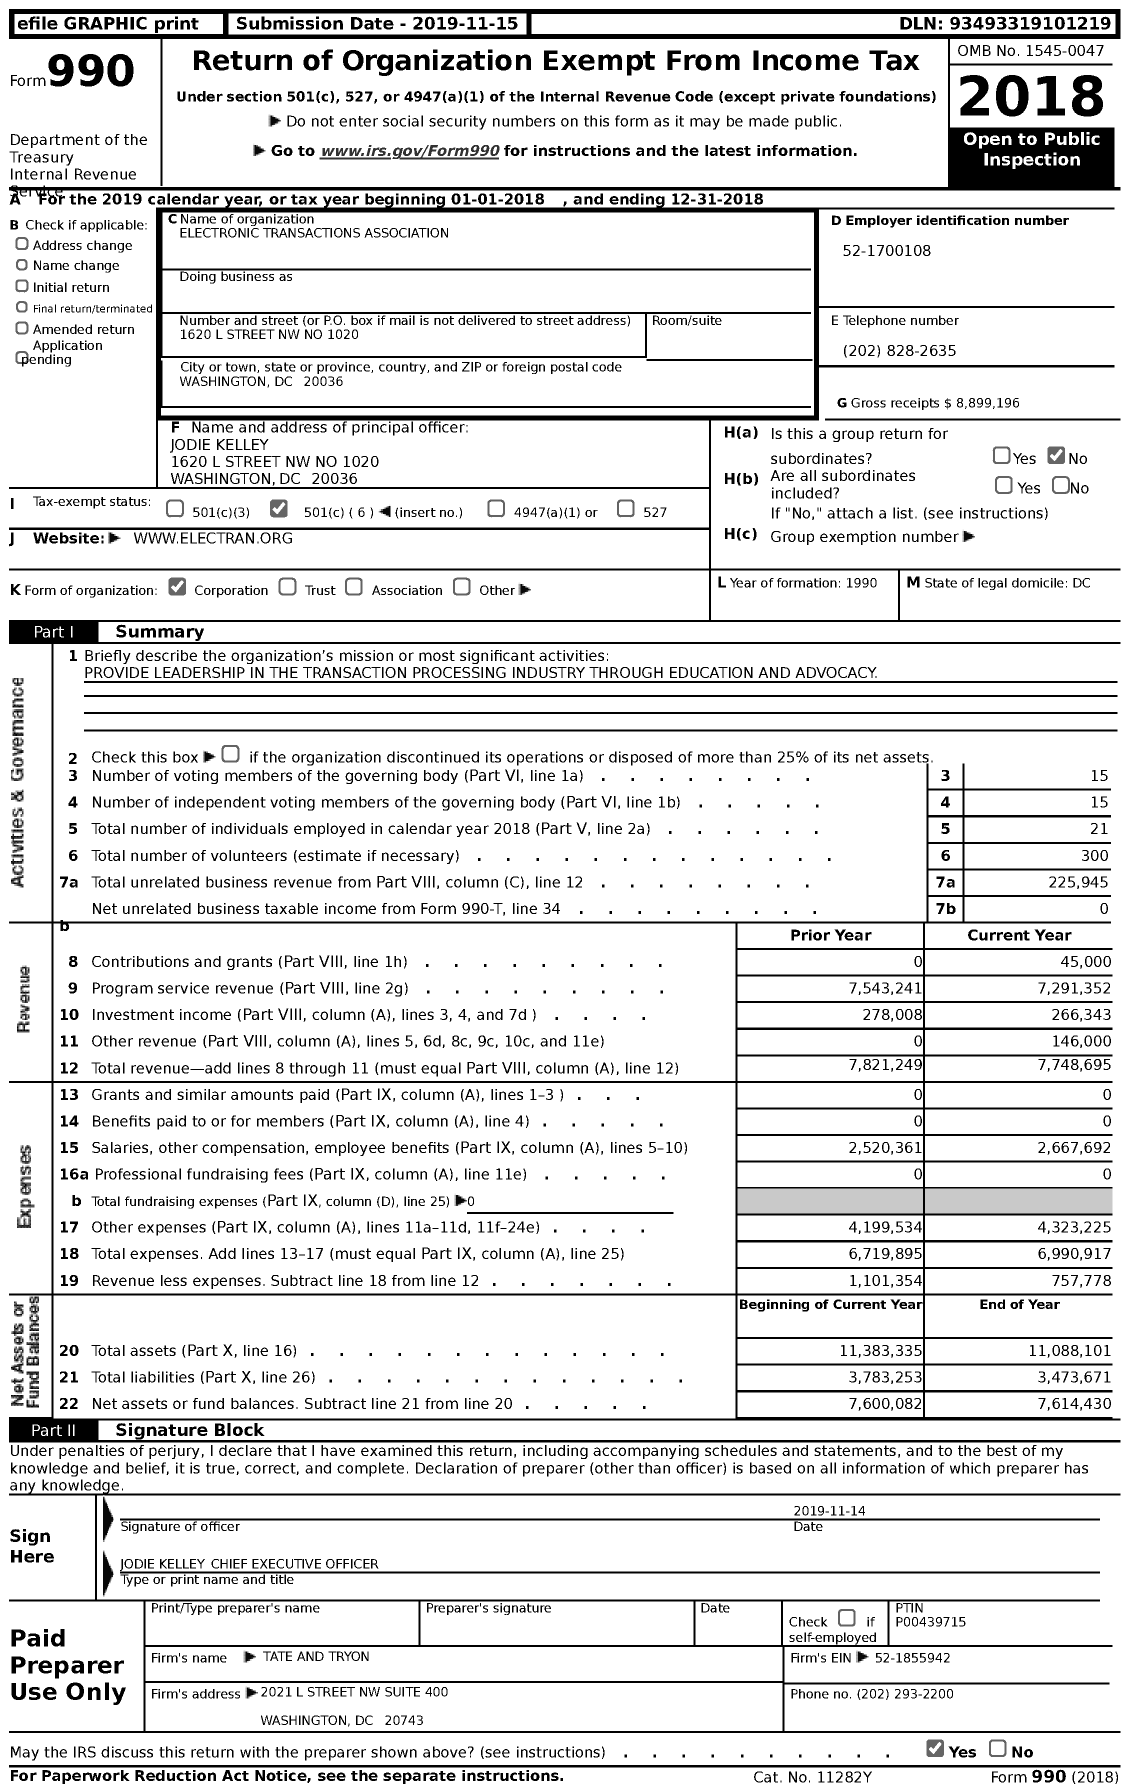 Image of first page of 2018 Form 990 for Electronic Transactions Association (ETA)